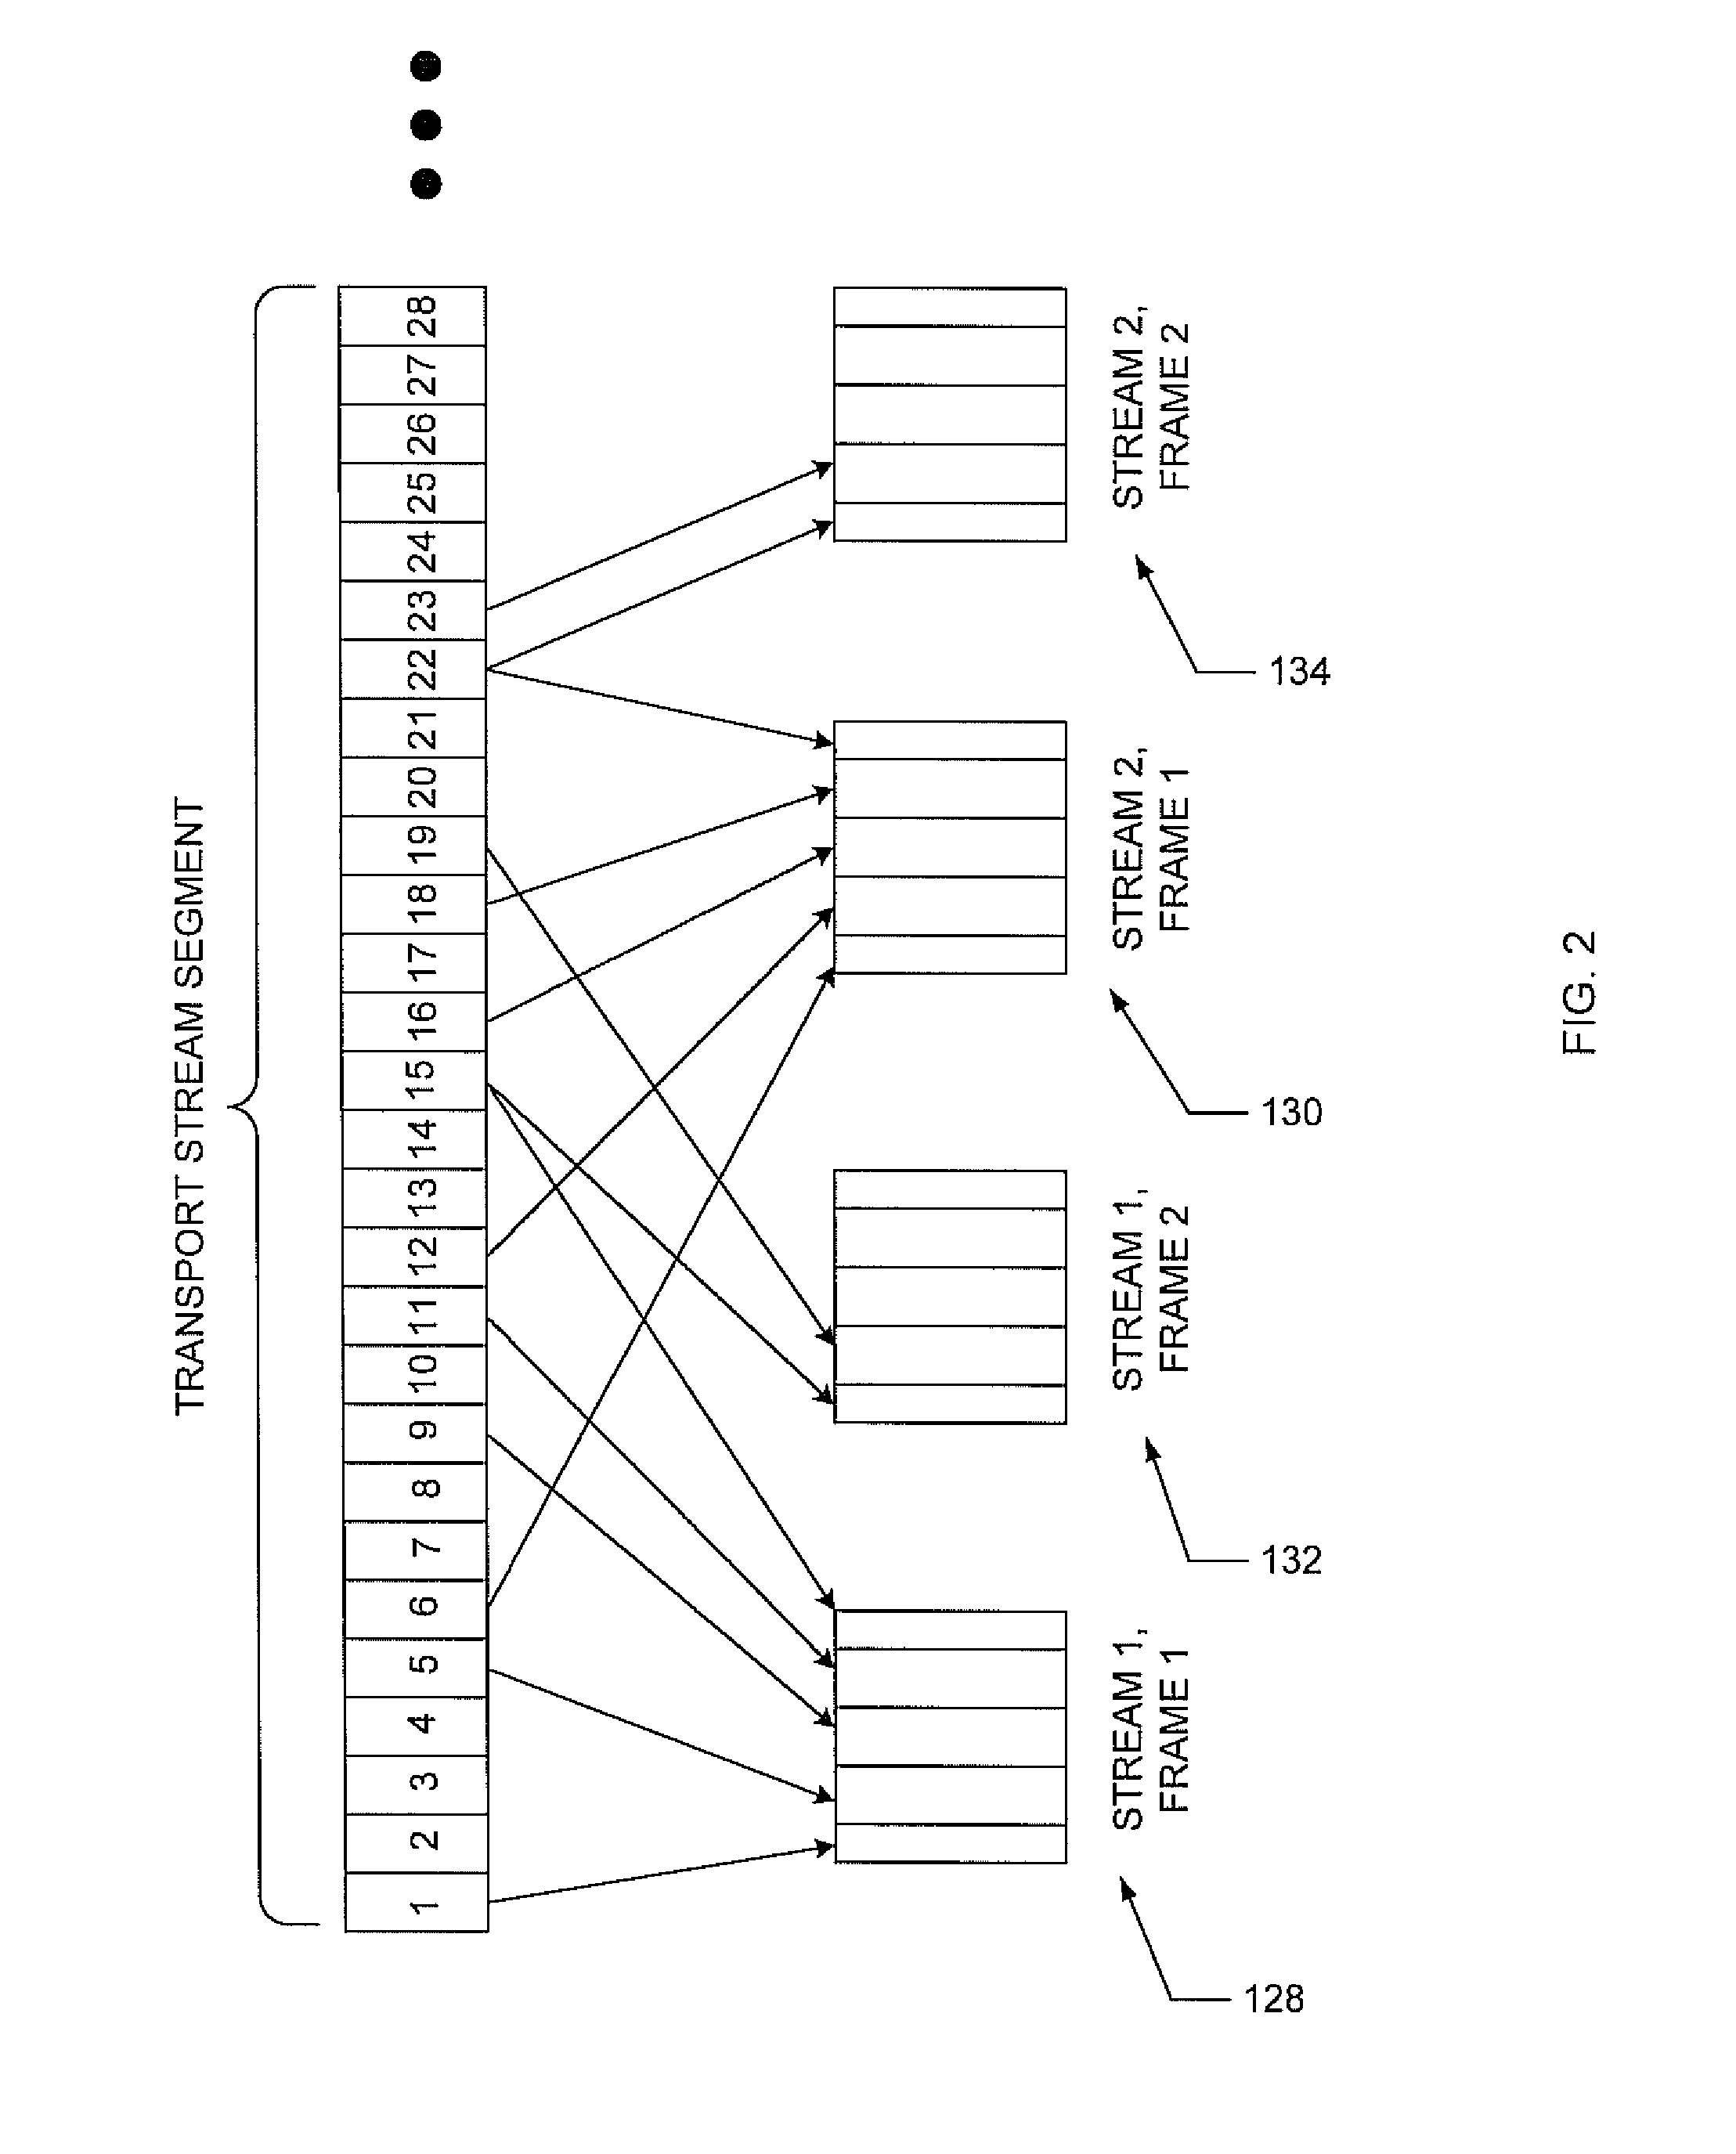 Compressed domain encoding apparatus and methods for use with media signals